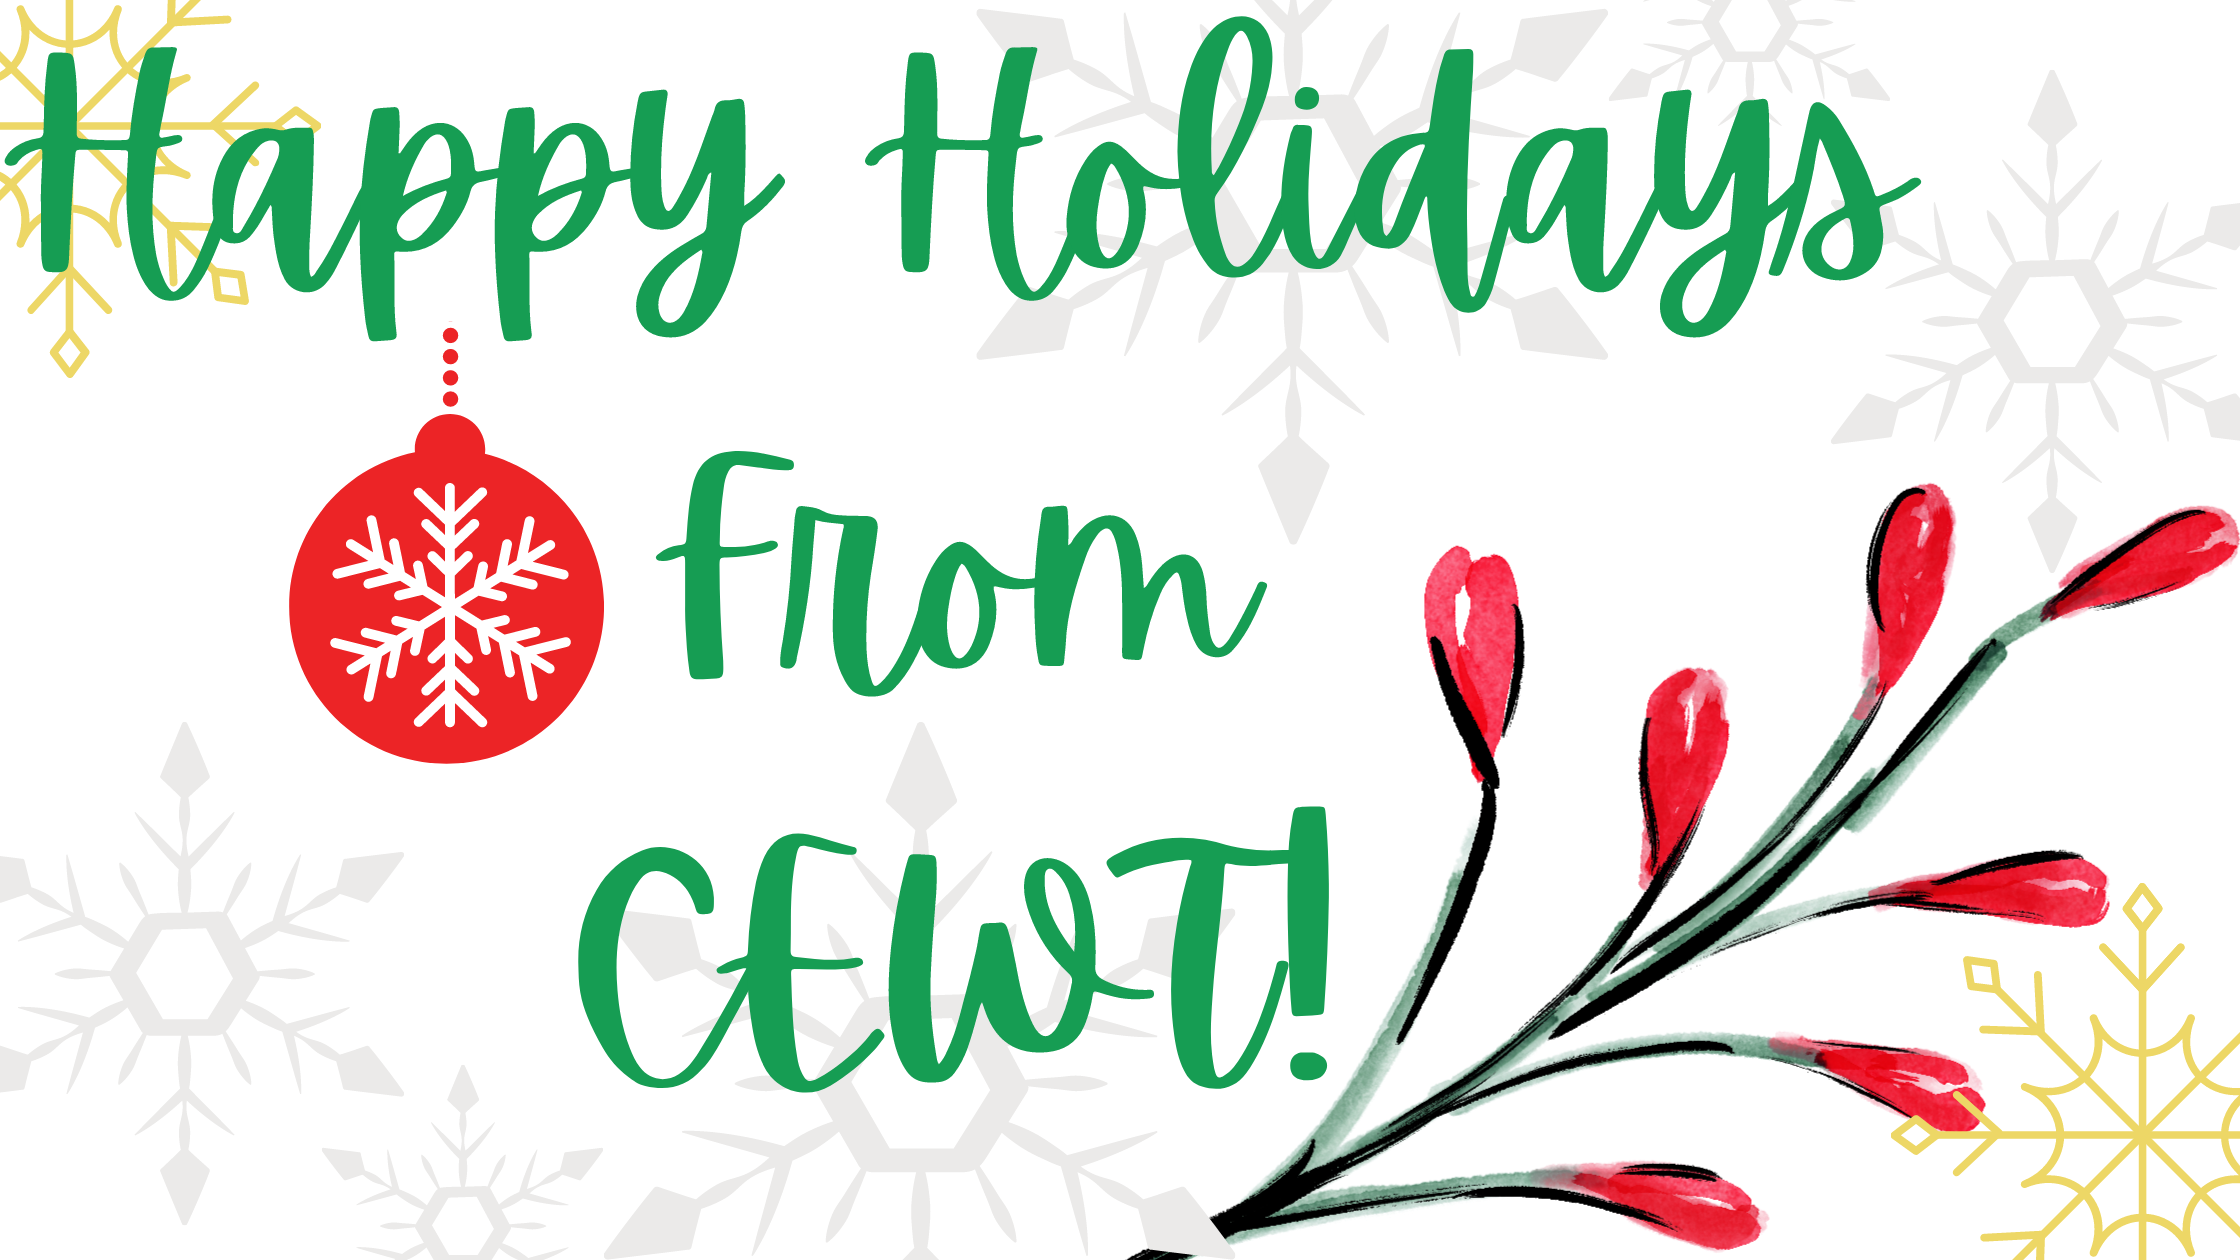 Happy Holidays From CEWT!